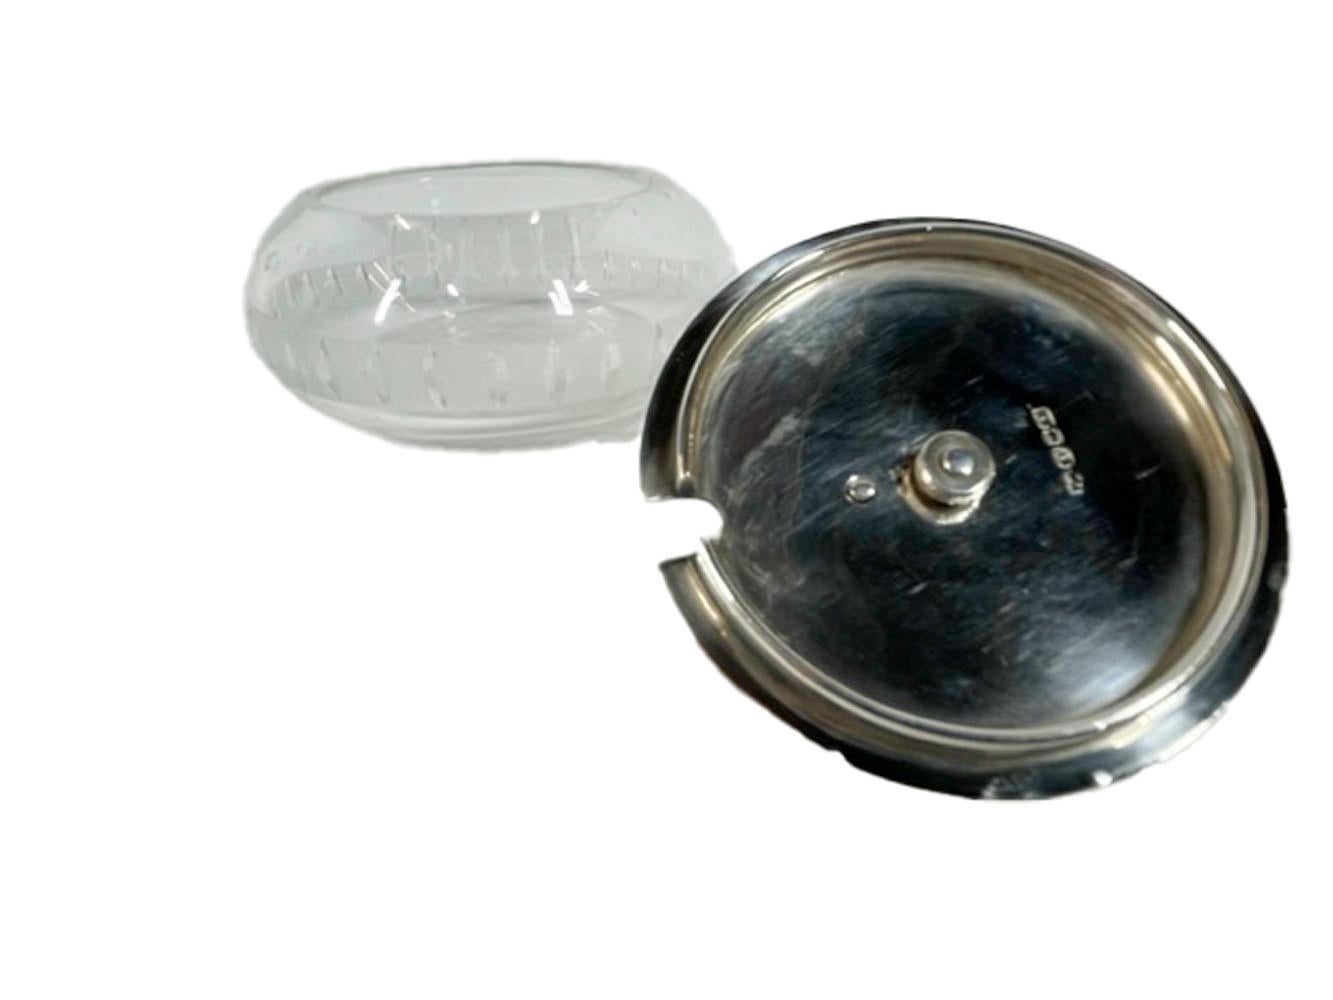 Finly crafted Art Deco cut glass, silver plate and ebony covered condiment / garnish jar / master salt in the form of a curling stone. The compressed ball-form jar encircled with vertical lozenge cuts along a frosted band and having a silver plate